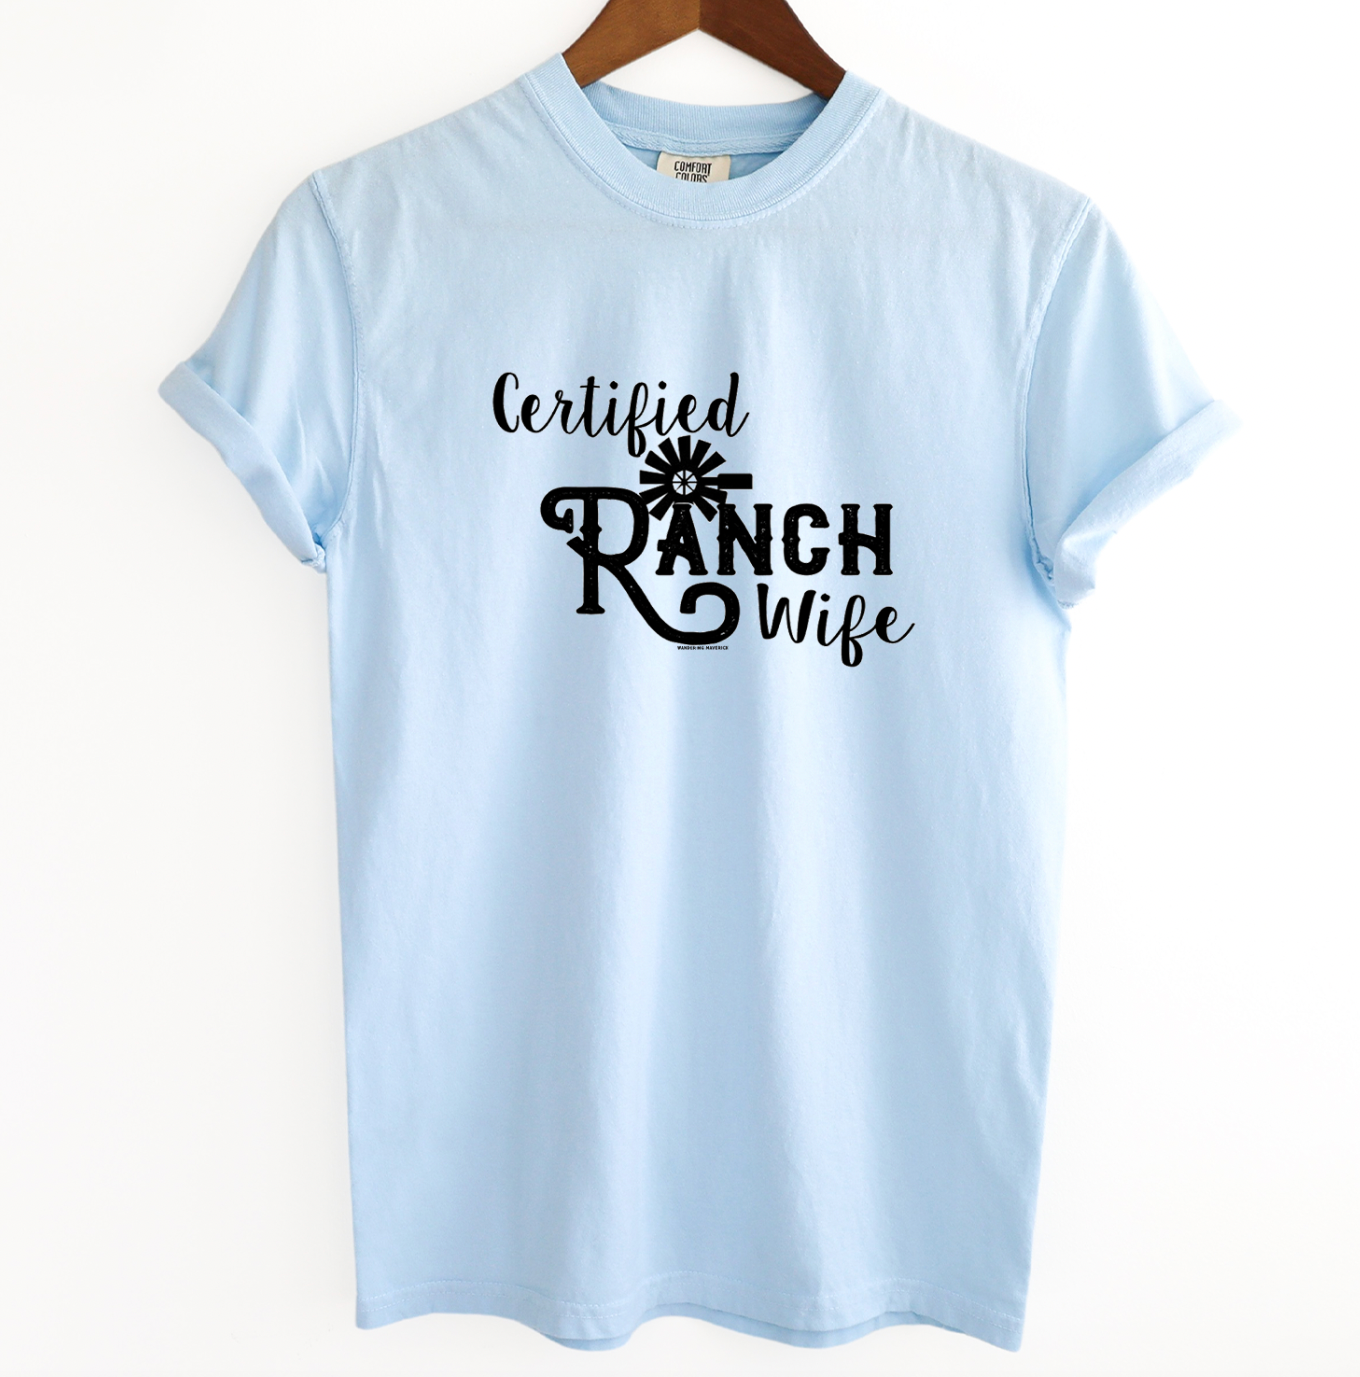 Certified Ranch Wife ComfortWash/ComfortColor T-Shirt (S-4XL) - Multiple Colors!